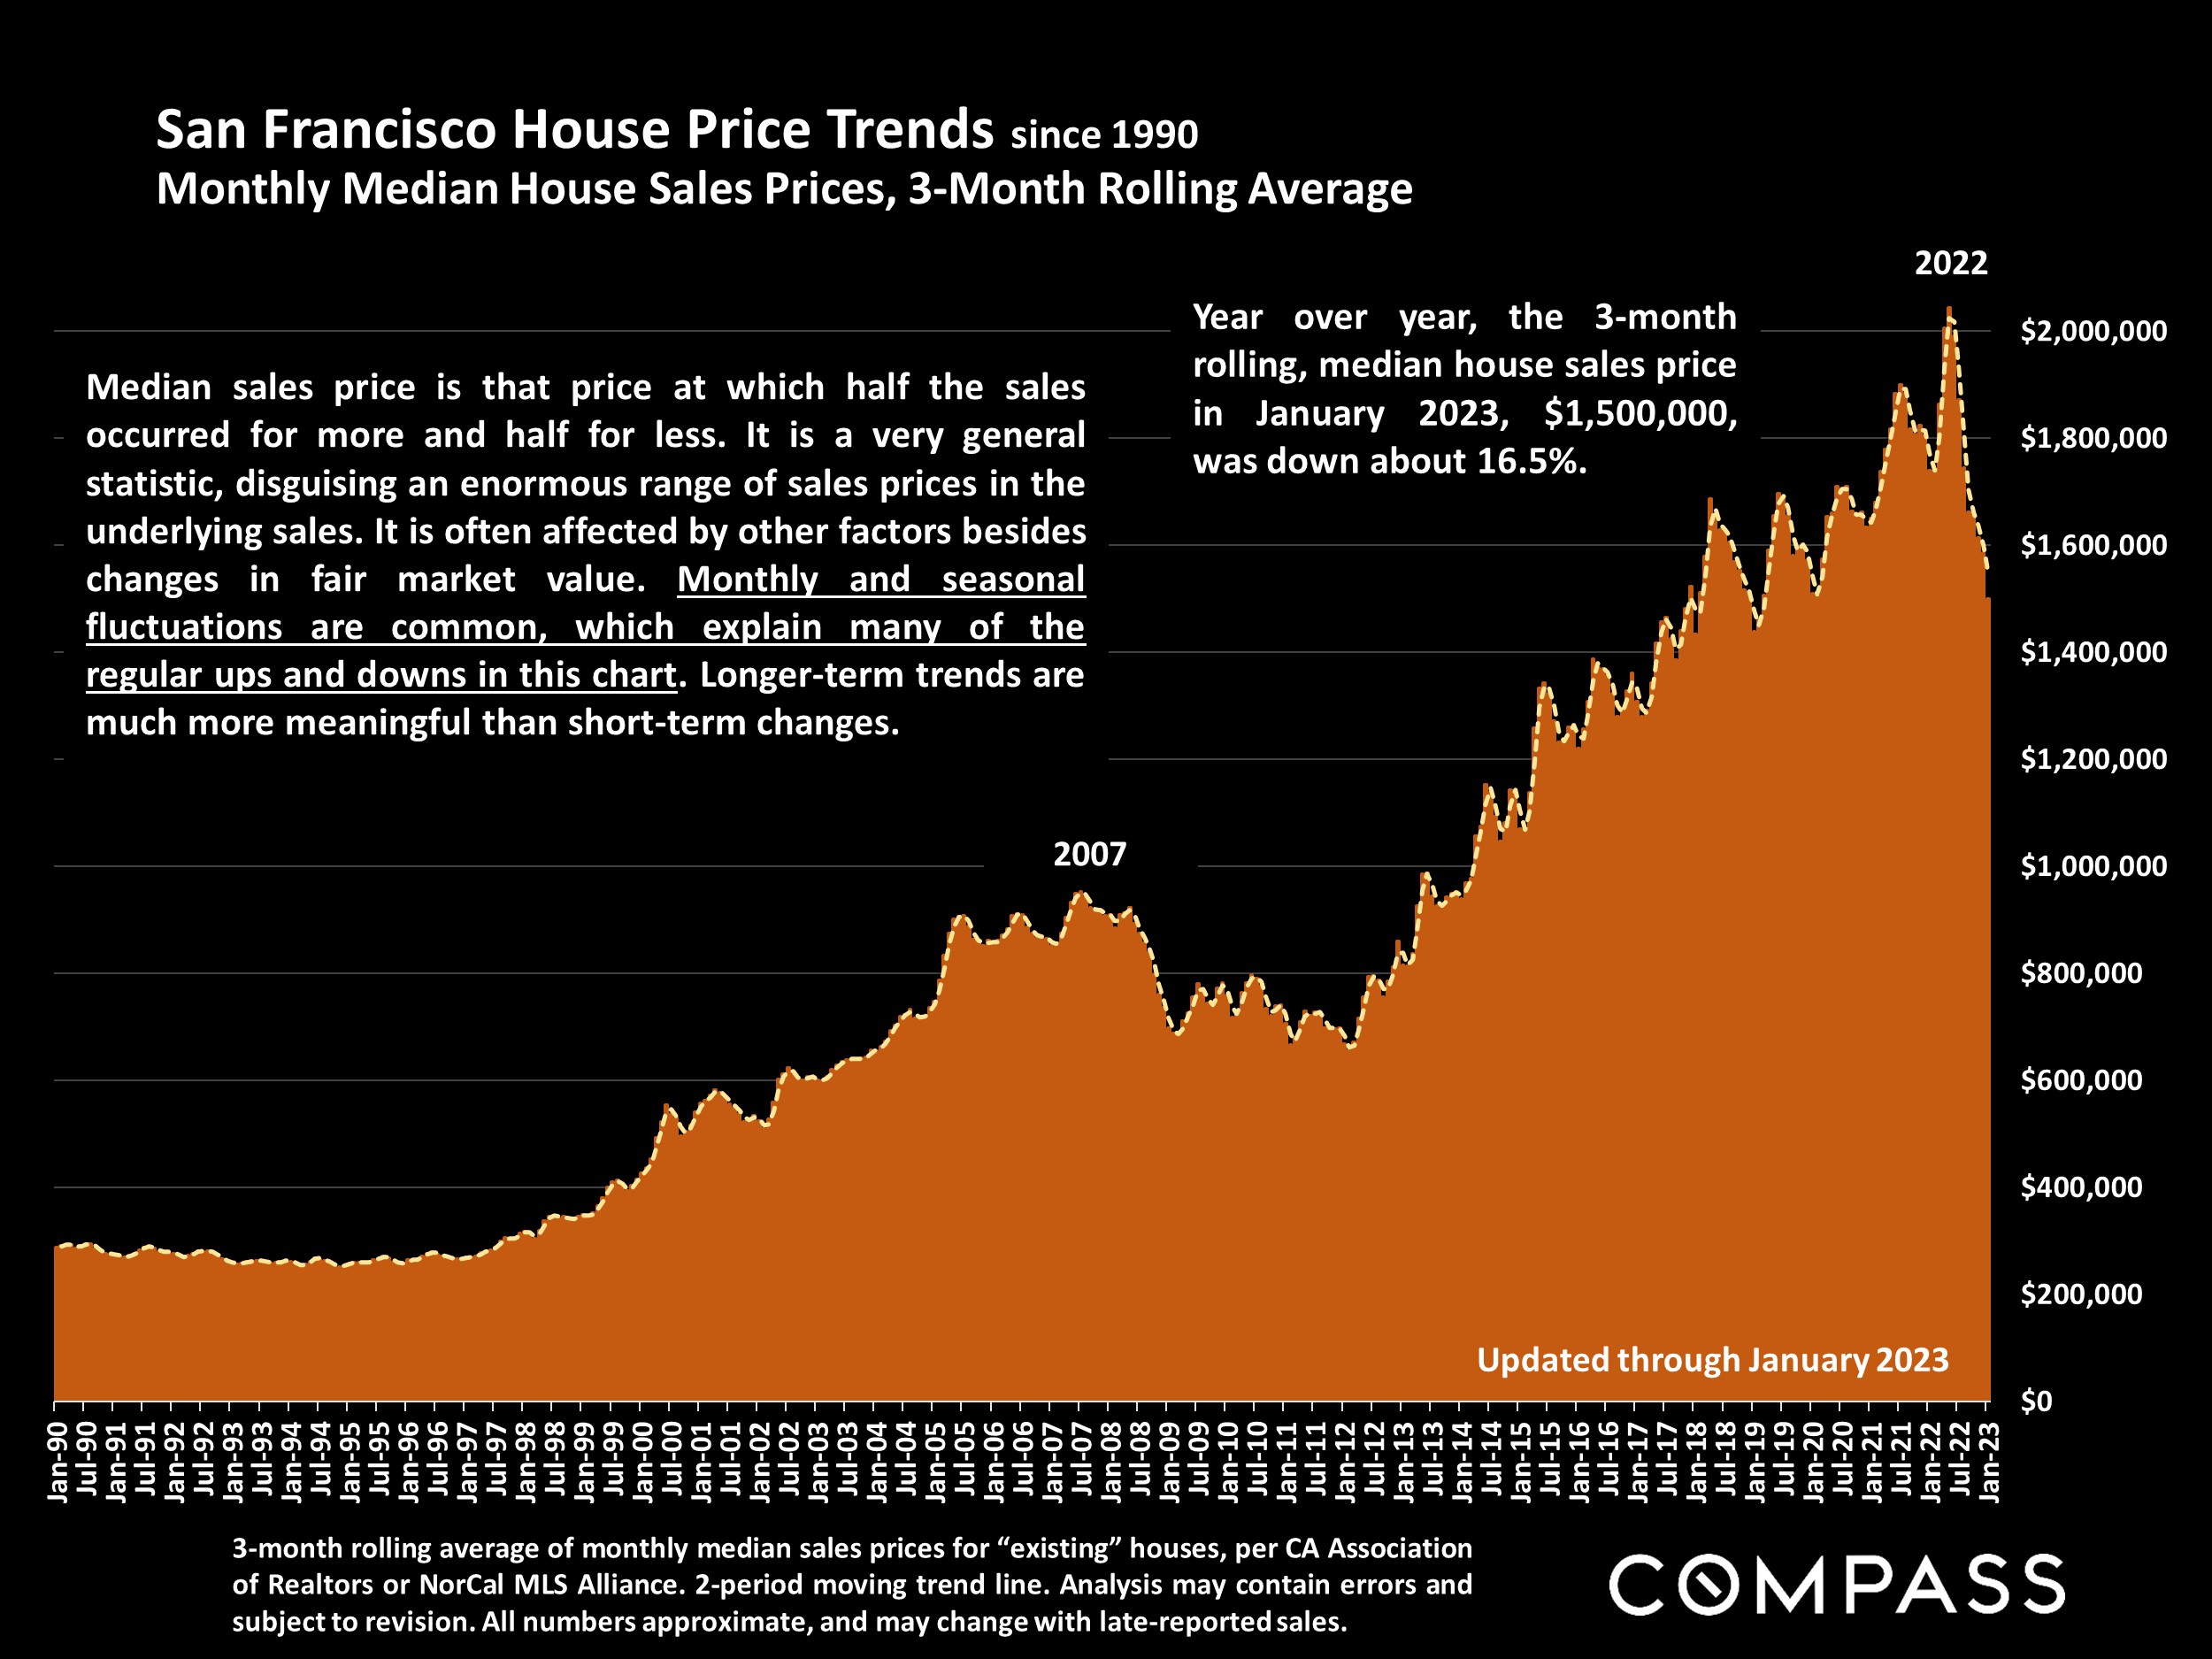 San Francisco House Price Trends since 1990